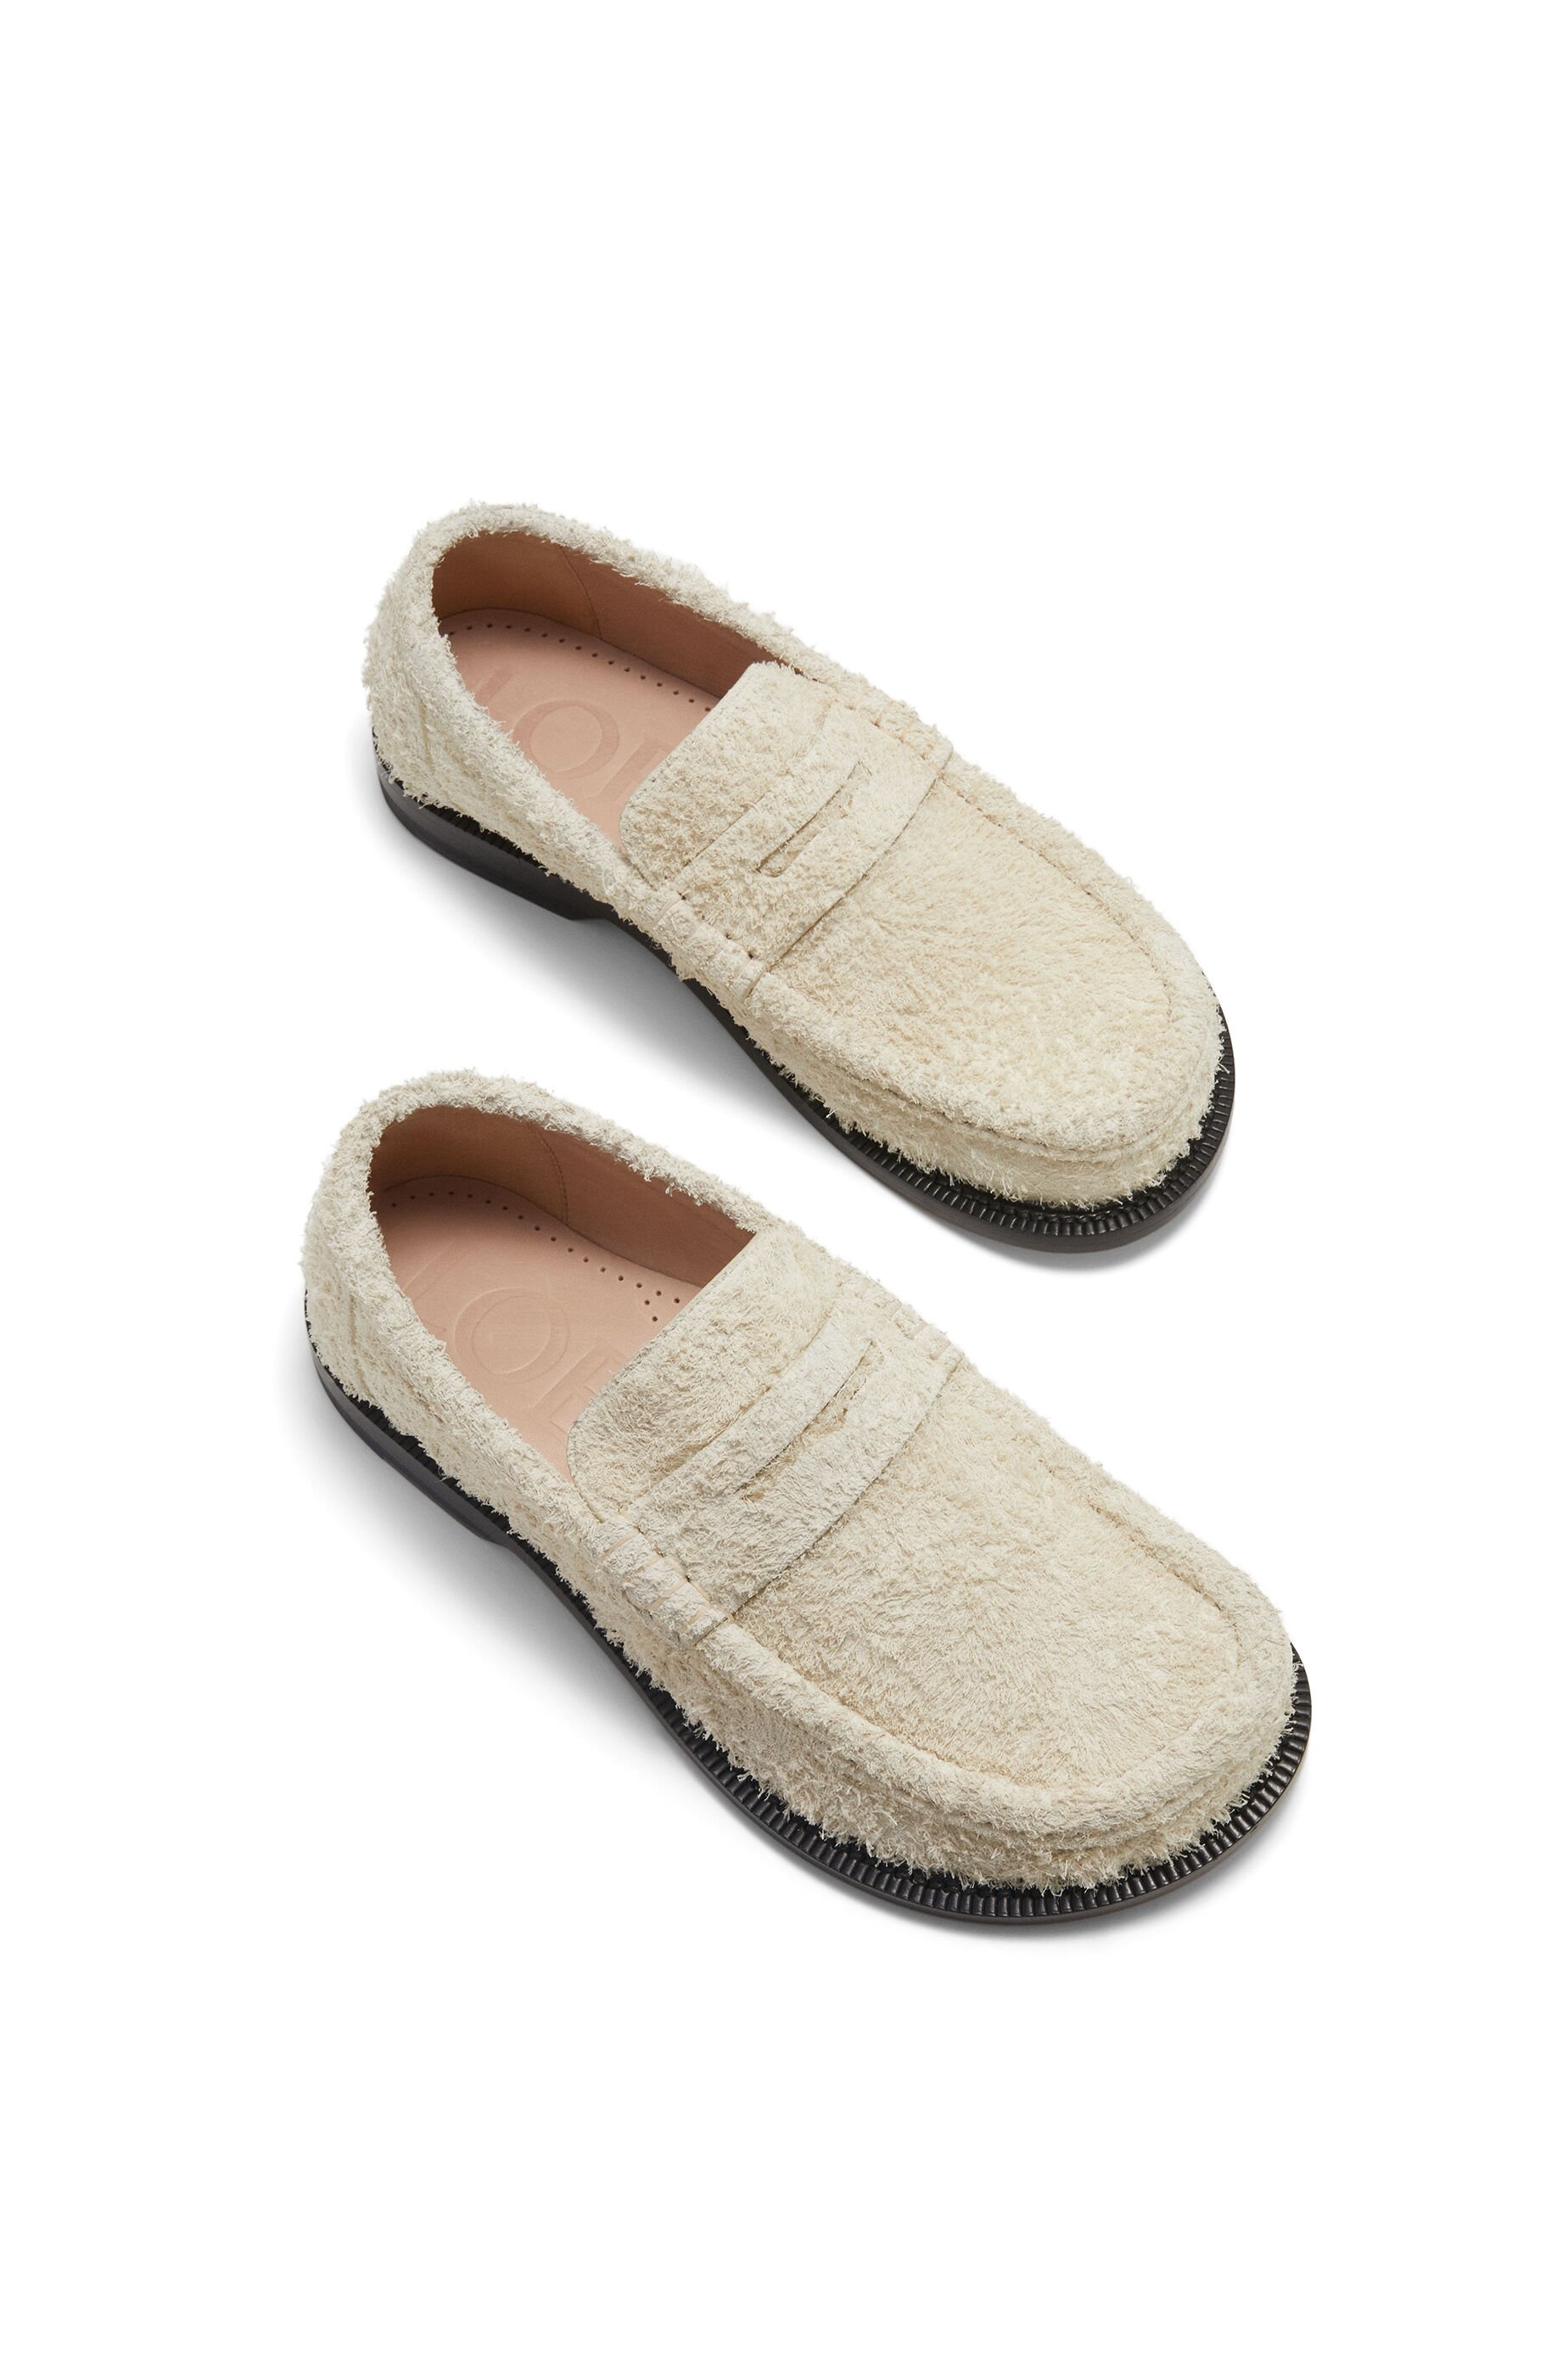 Campo loafer in brushed suede - 4